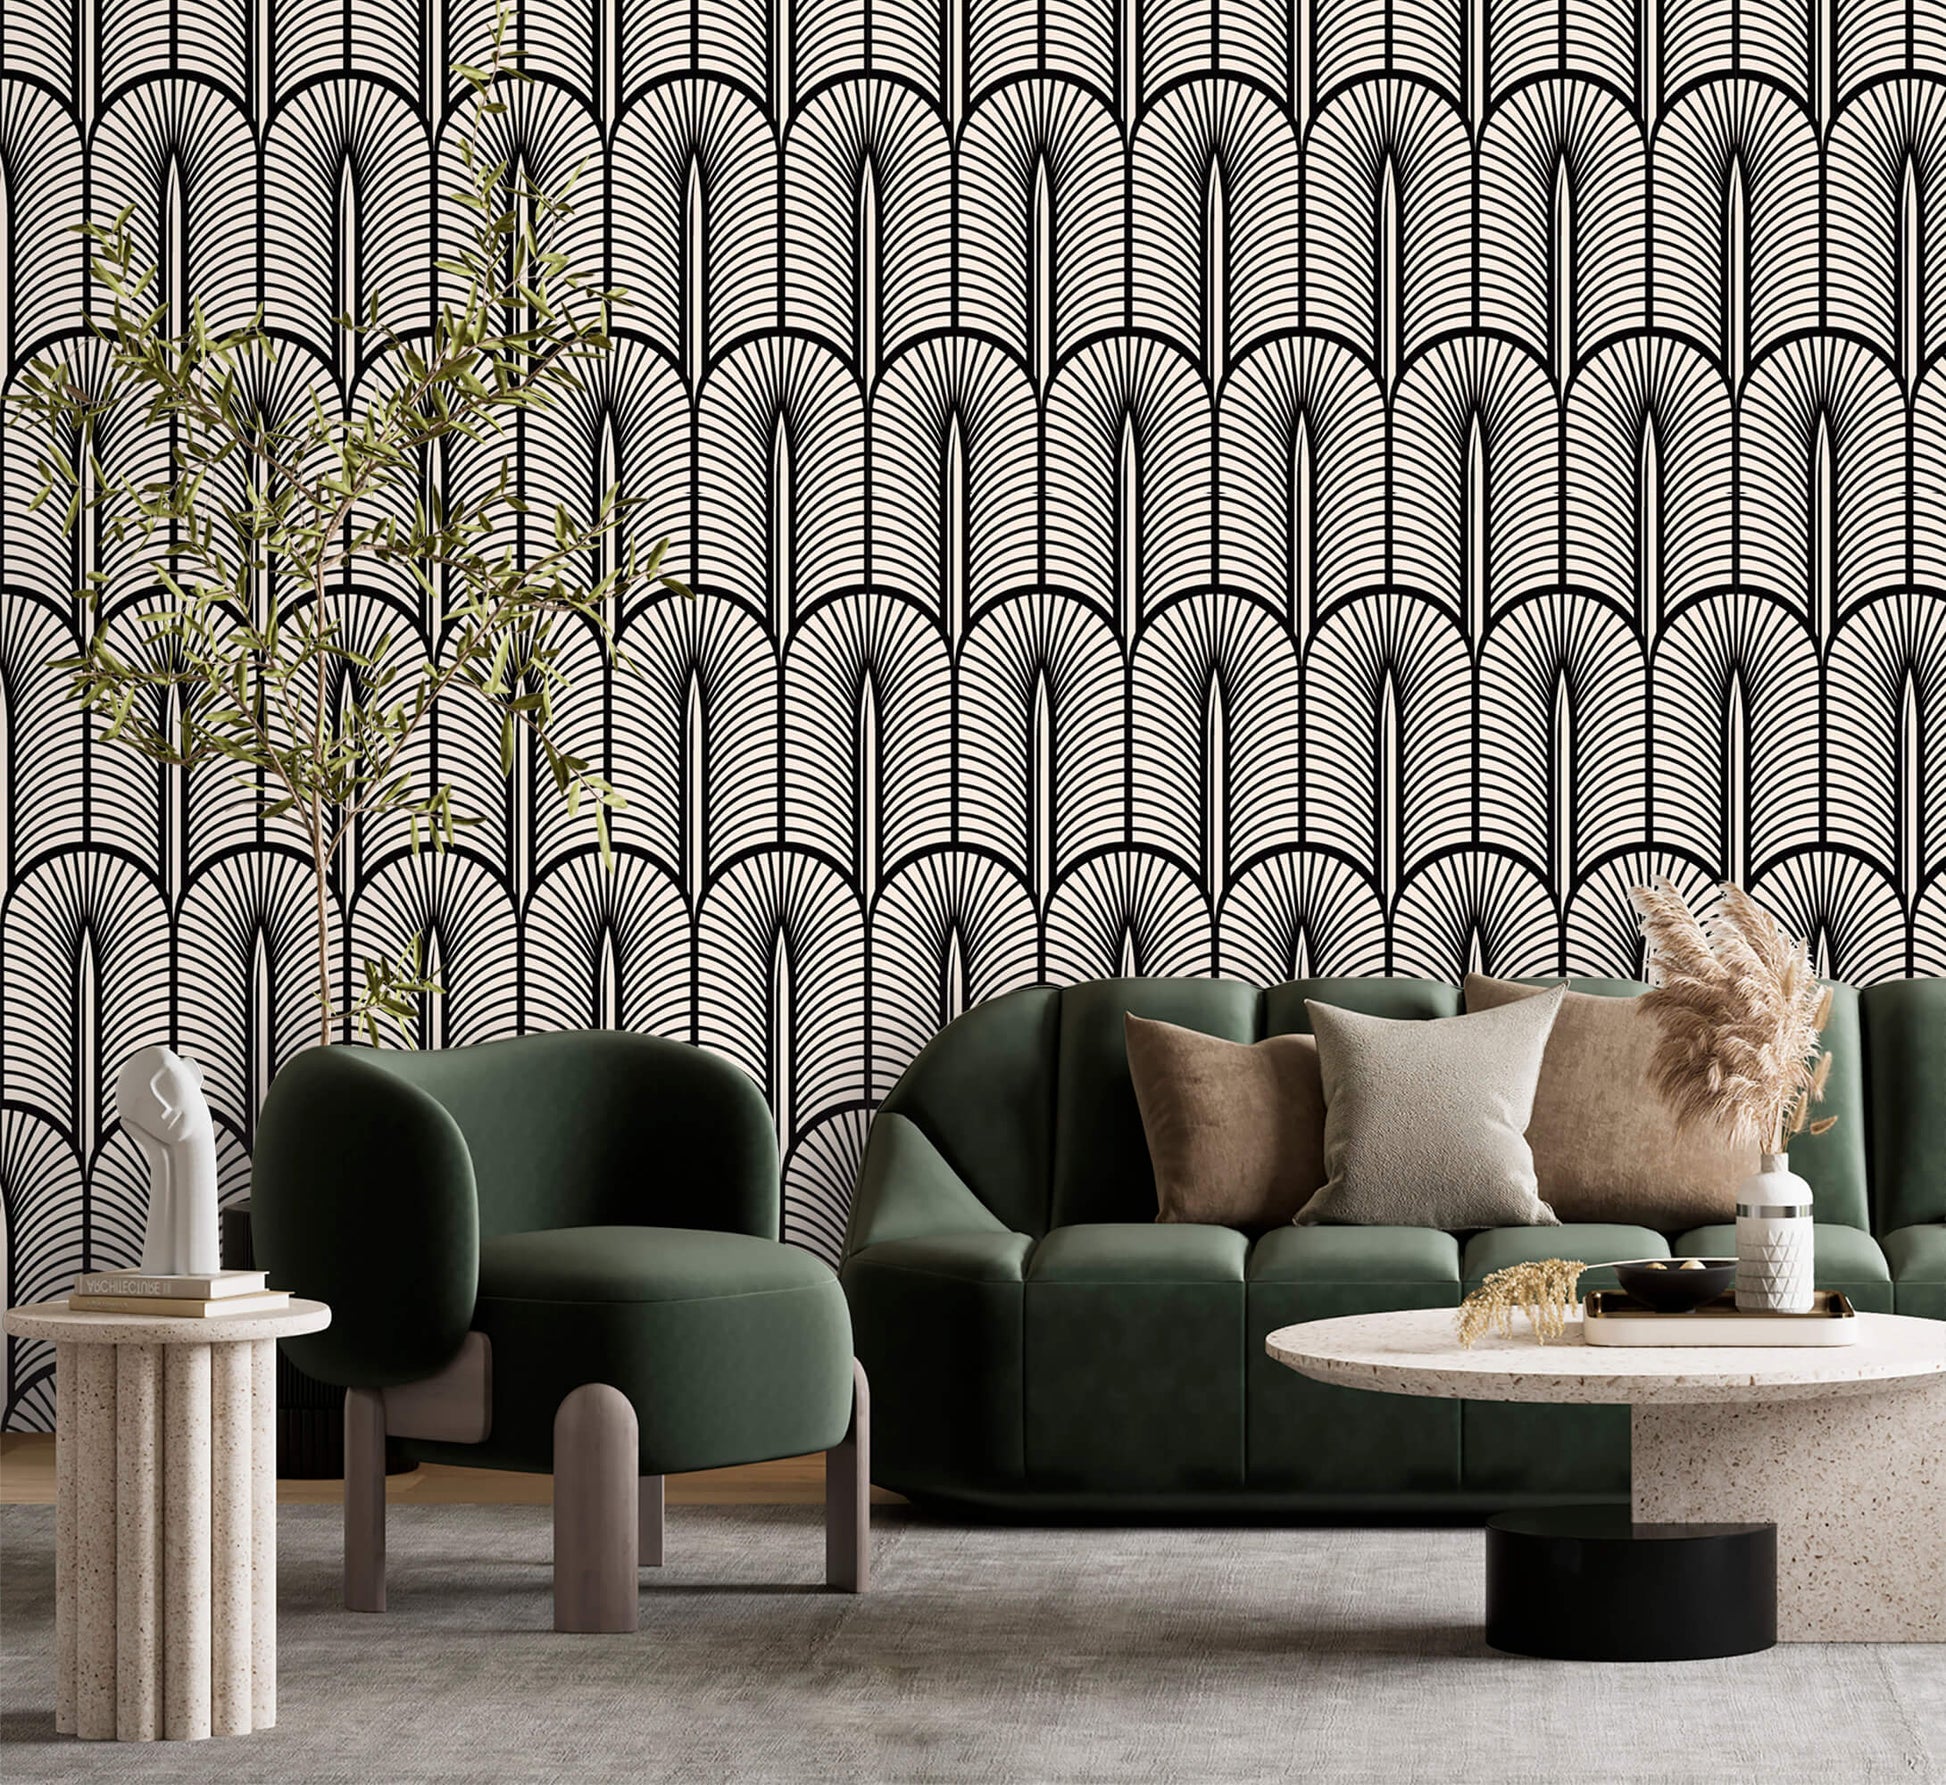 Monochrome Deco Elegance Wallpaper: Add a touch of timeless sophistication to your space with this sleek and stylish design, blending monochrome tones with Art Deco-inspired elegance.